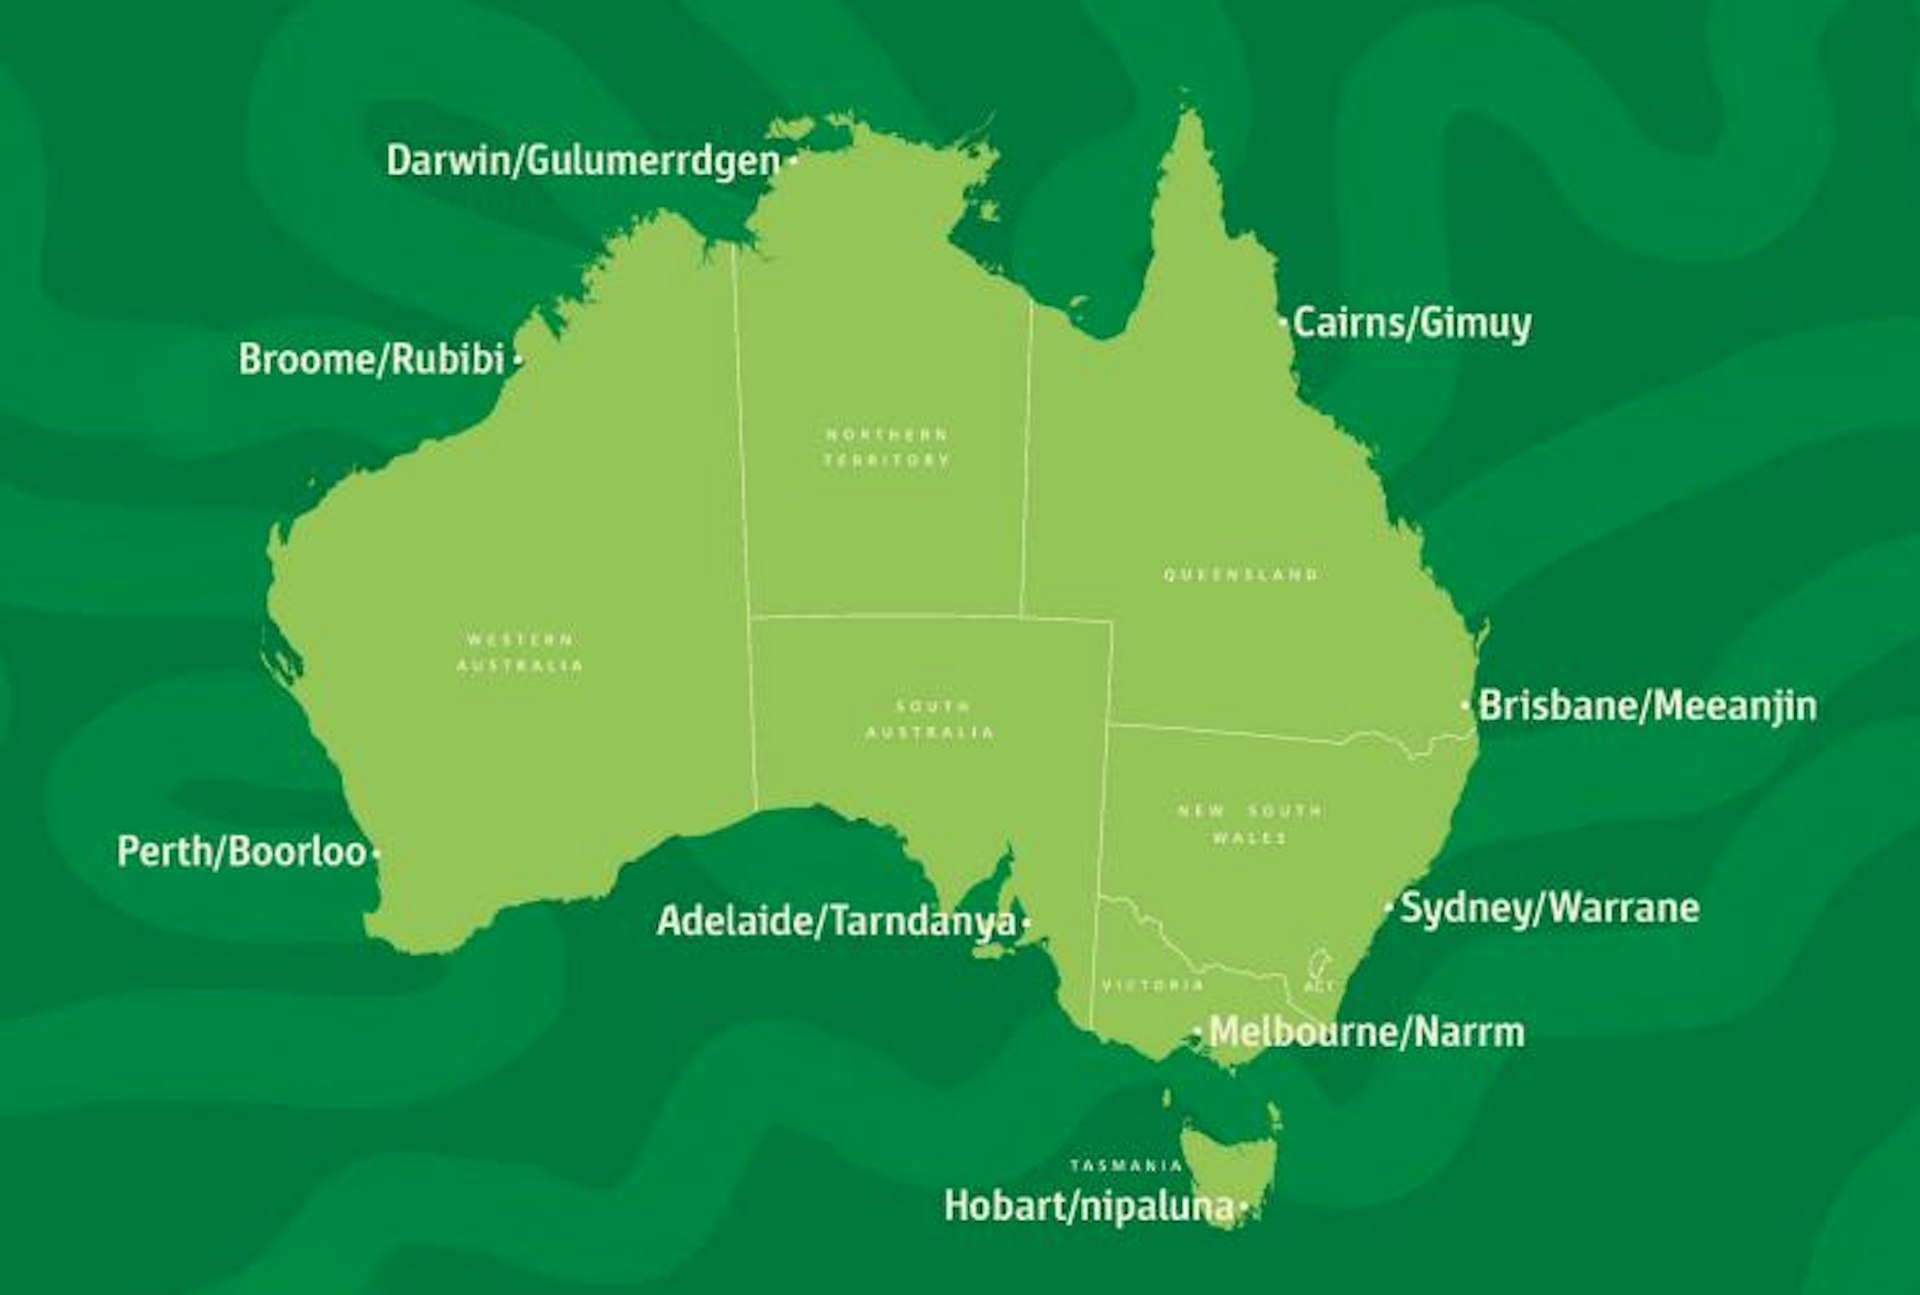 Map of Australia with dual-named cities